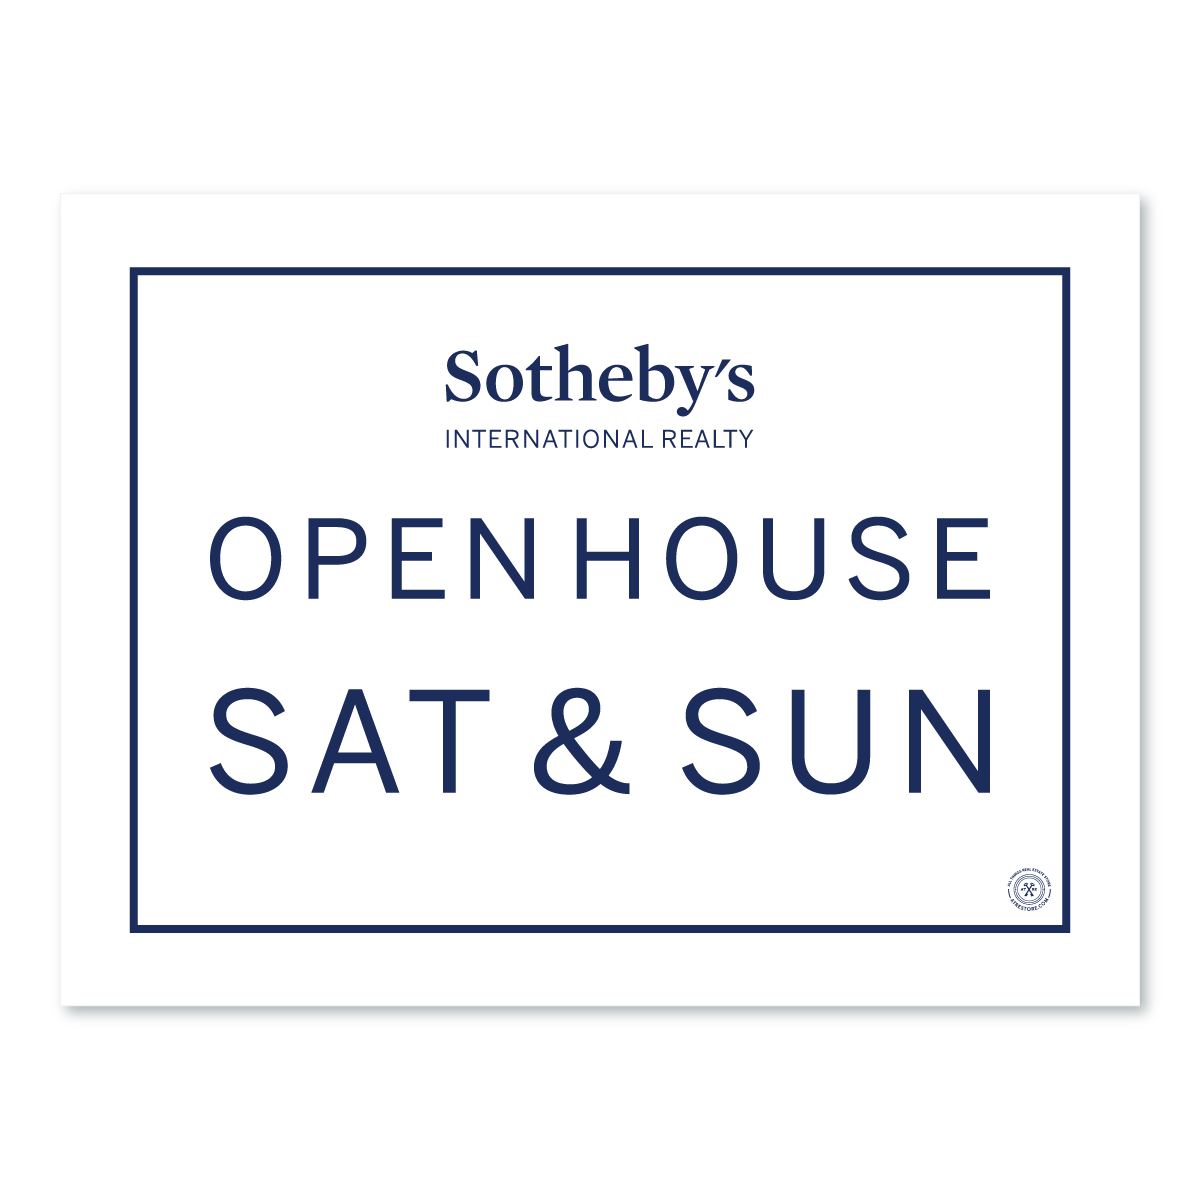 Sotheby's Open House SAT & SUN Minimal - Yard Sign - All Things Real Estate